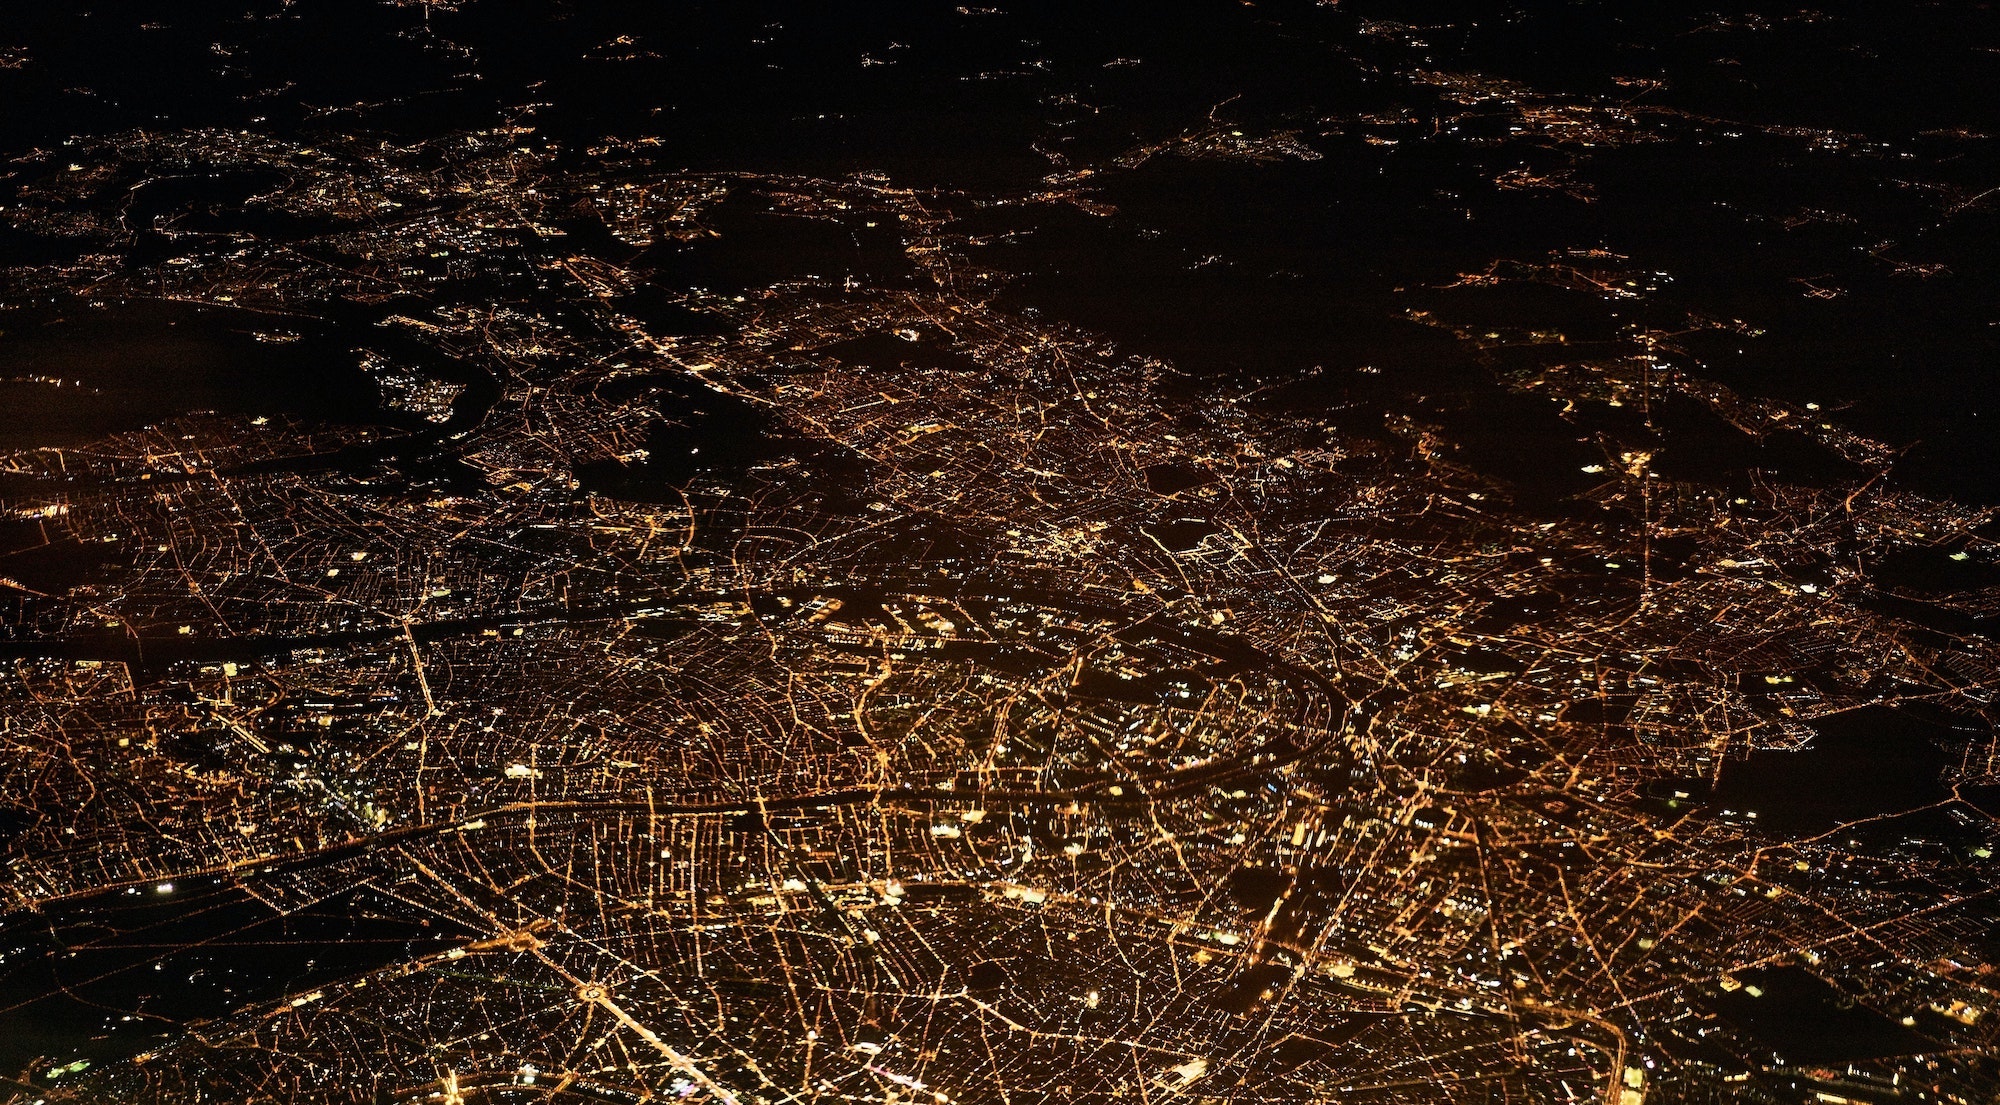 nighttime aerial photo of a city landscape